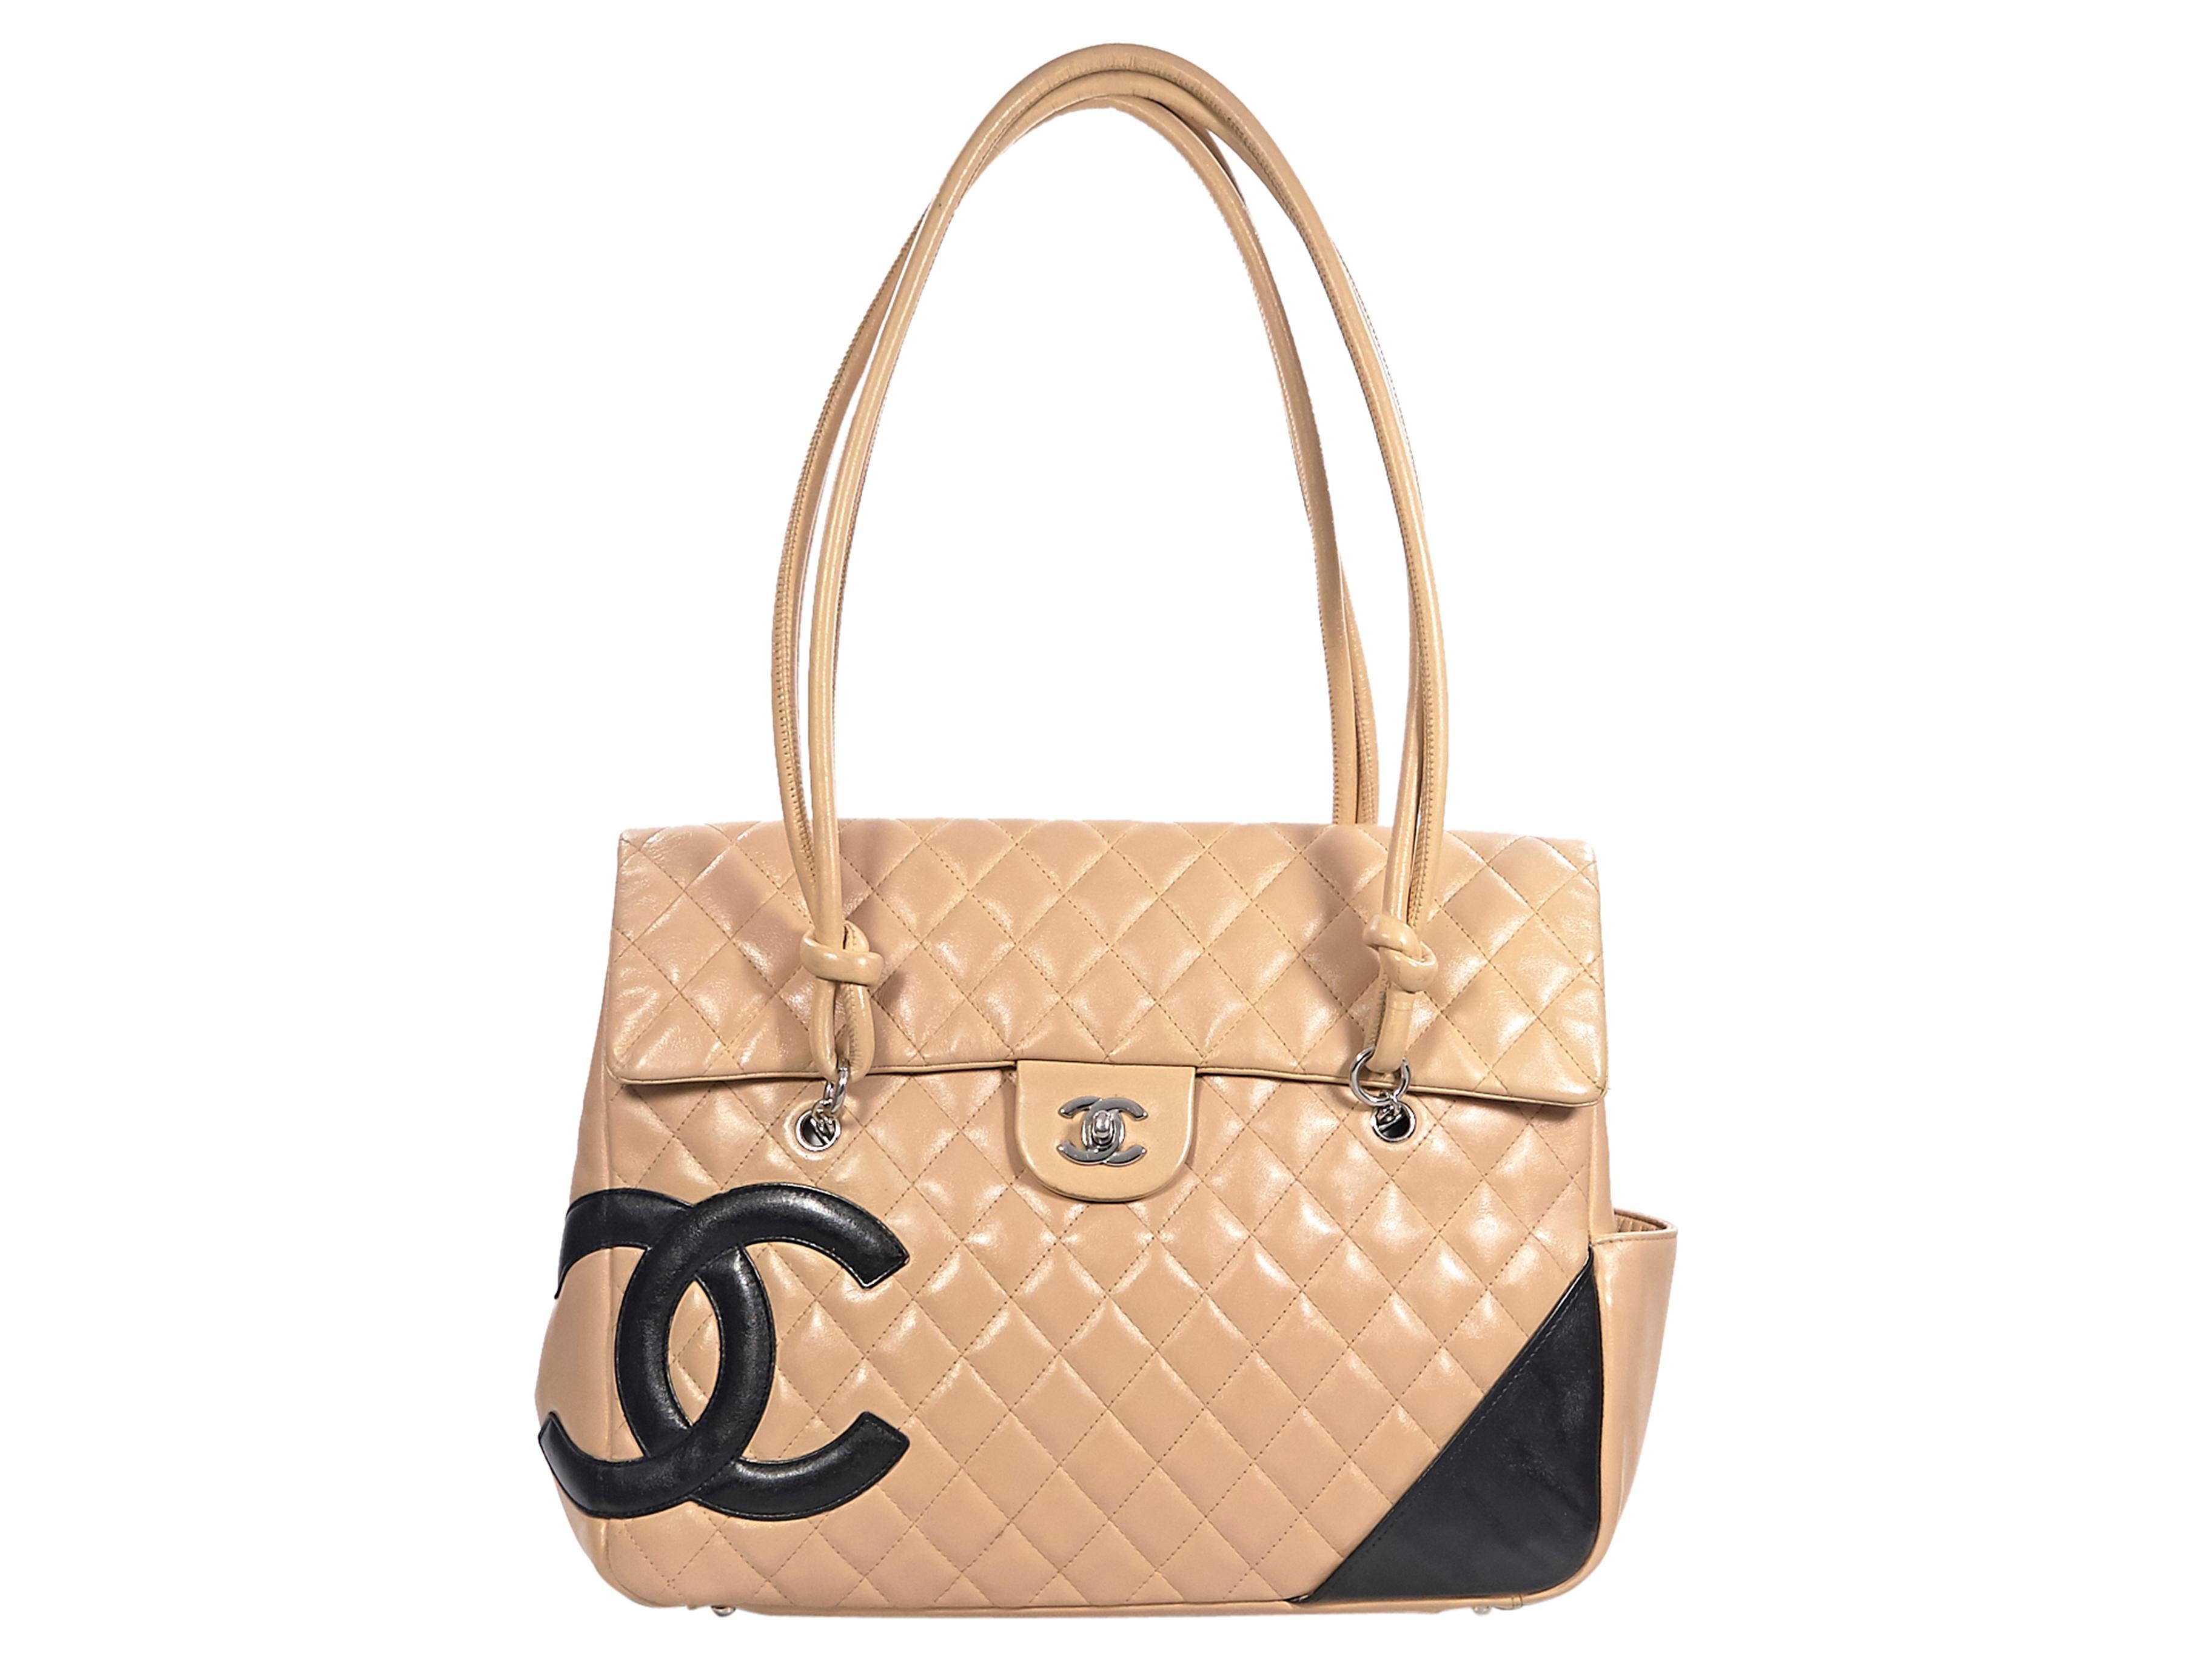 Product details:  Tan and black Ligne Cambon quilted lambskin leather flap tote bag by Chanel.  Dual shoulder straps.  Front flap with twist-lock closure.  Lined interior with inner zip pocket.  Exterior side and back slide pockets.  Protective